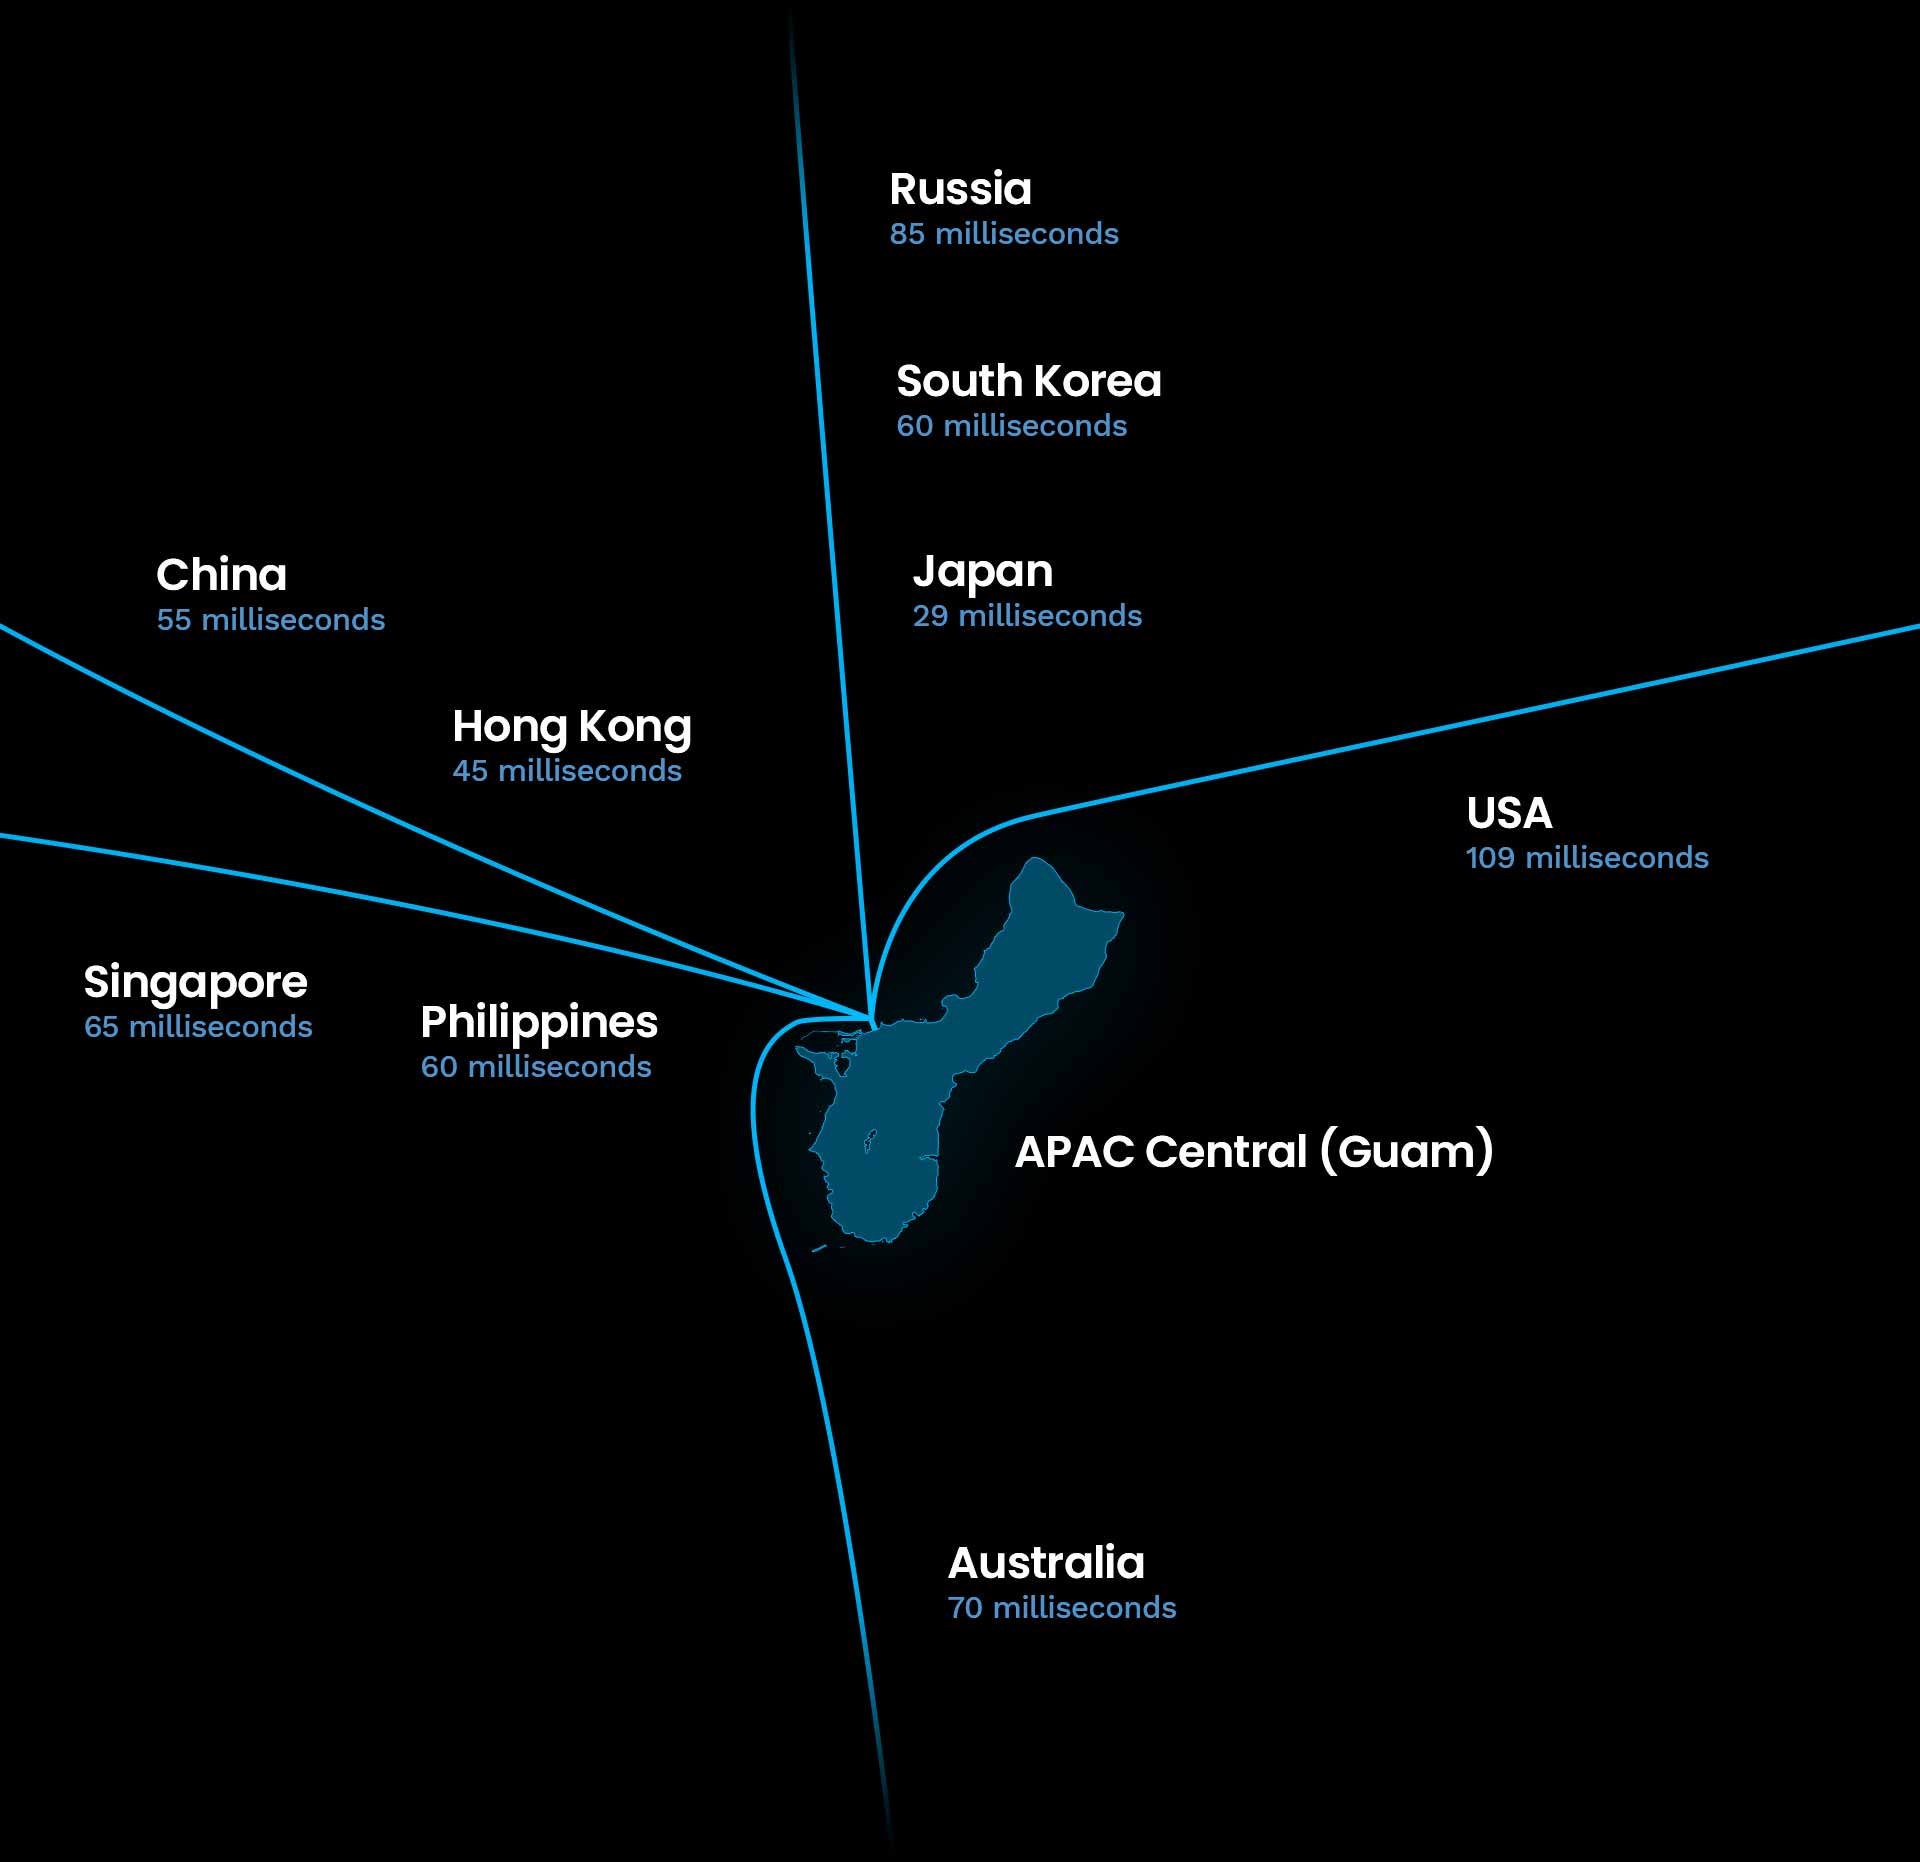 A stylised map showing APAC Central (Guam), with subsea cables and latencies to nearby countries